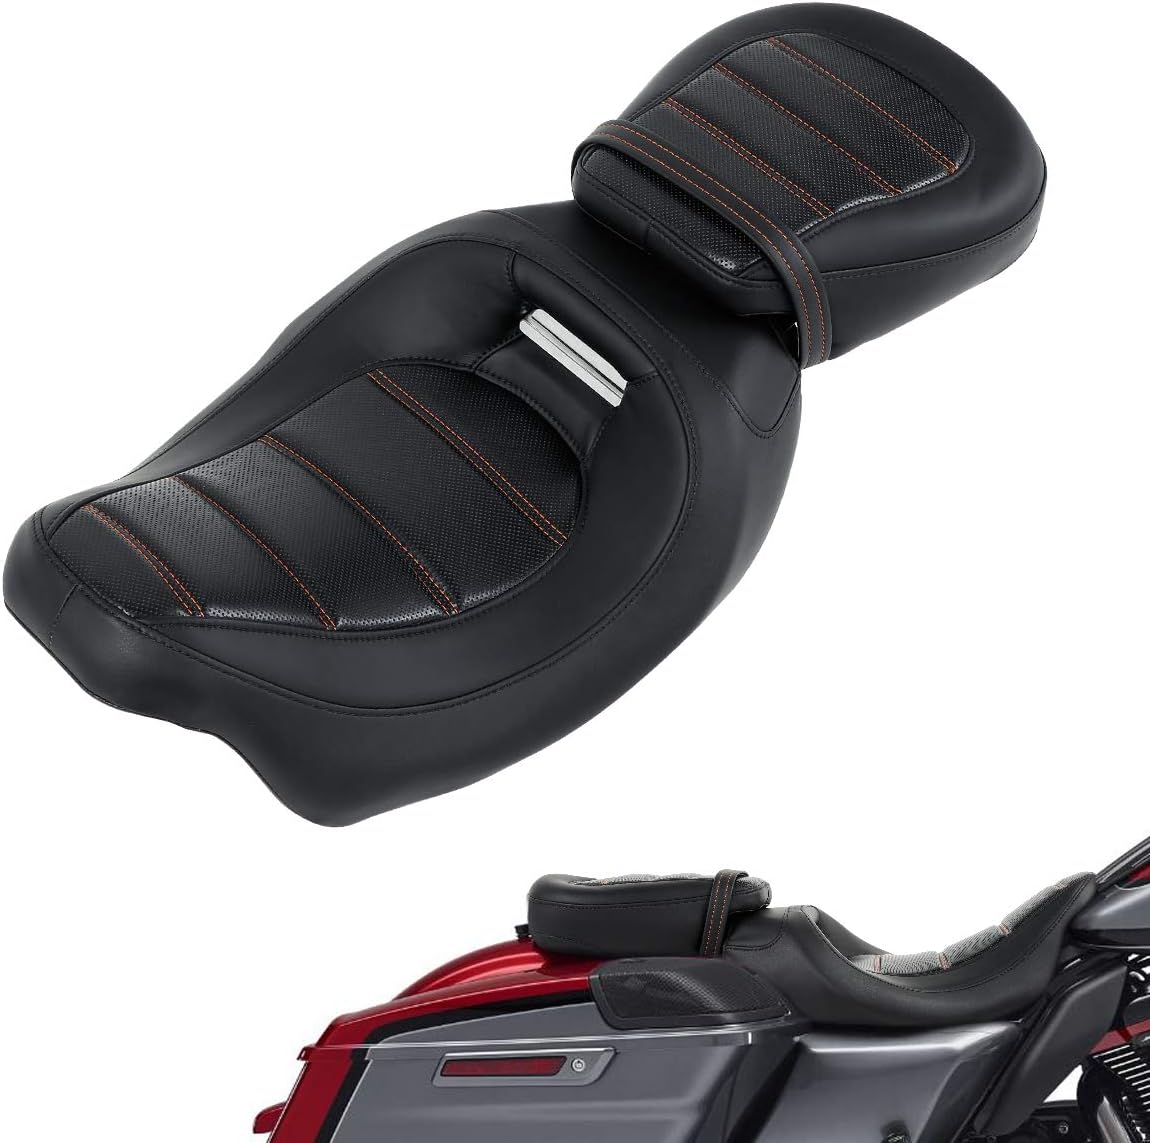 Low-Profile Leather Seat Review